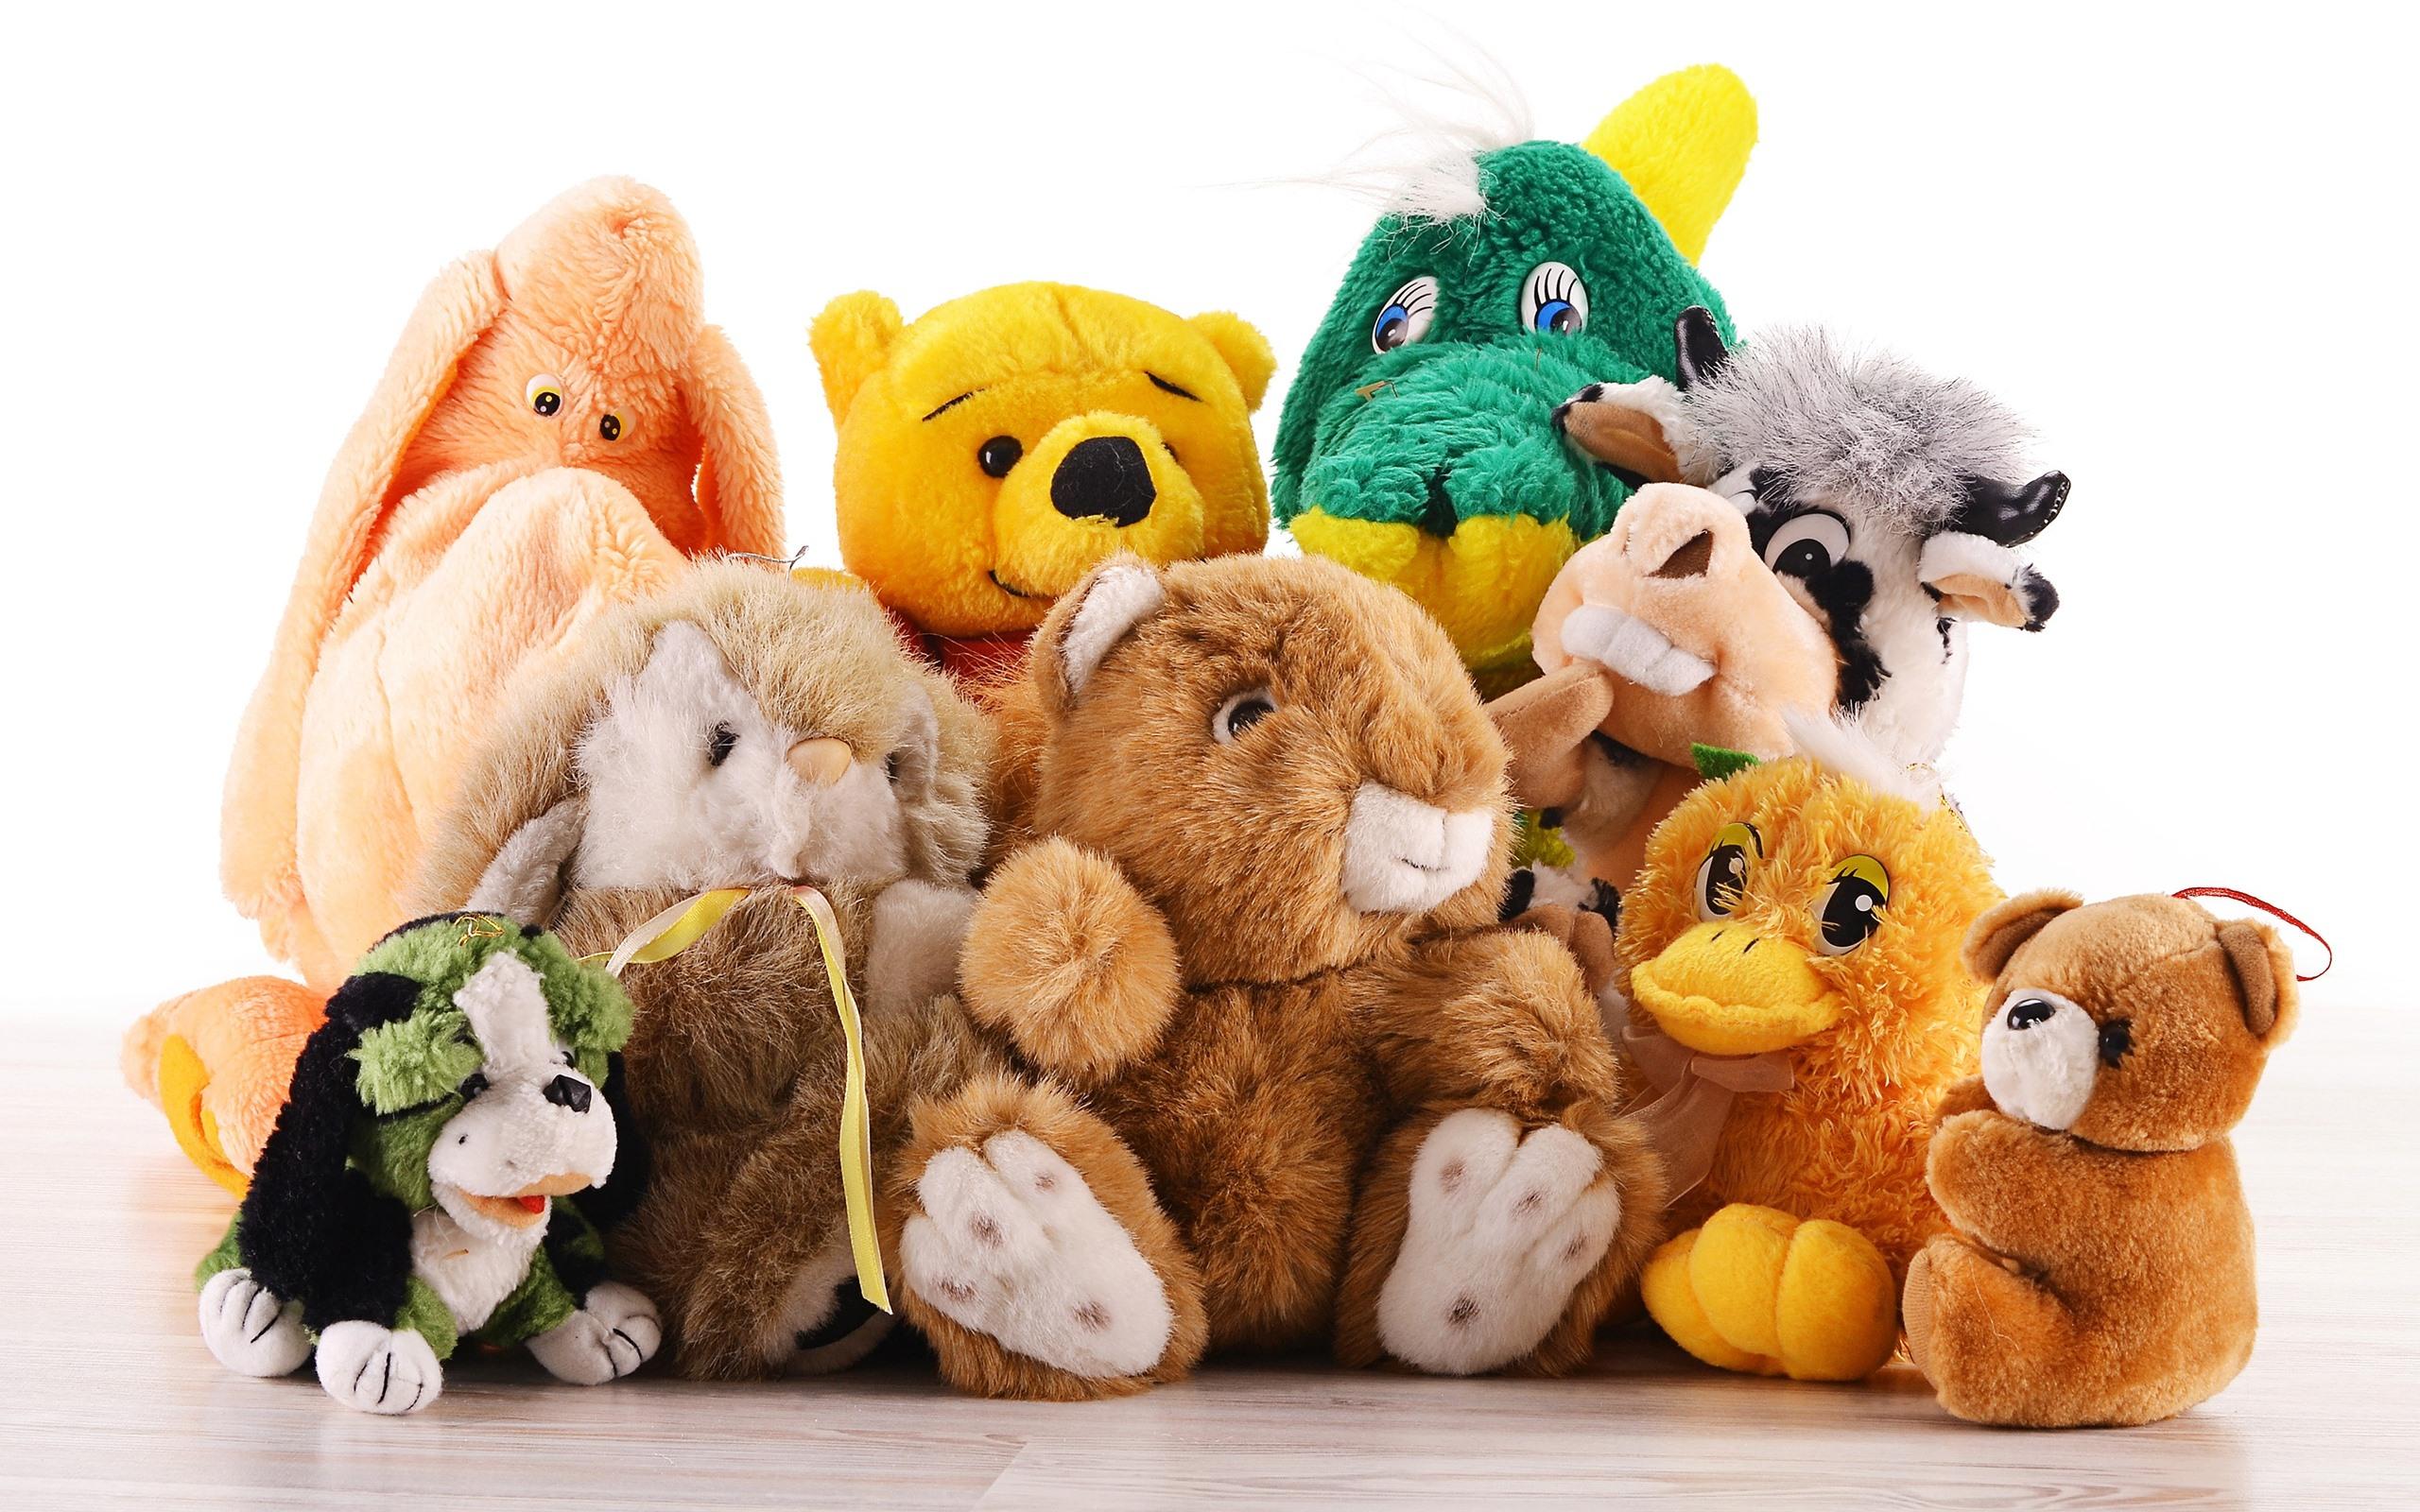 Wallpaper Some plush toys 2560x1600 HD Picture, Image